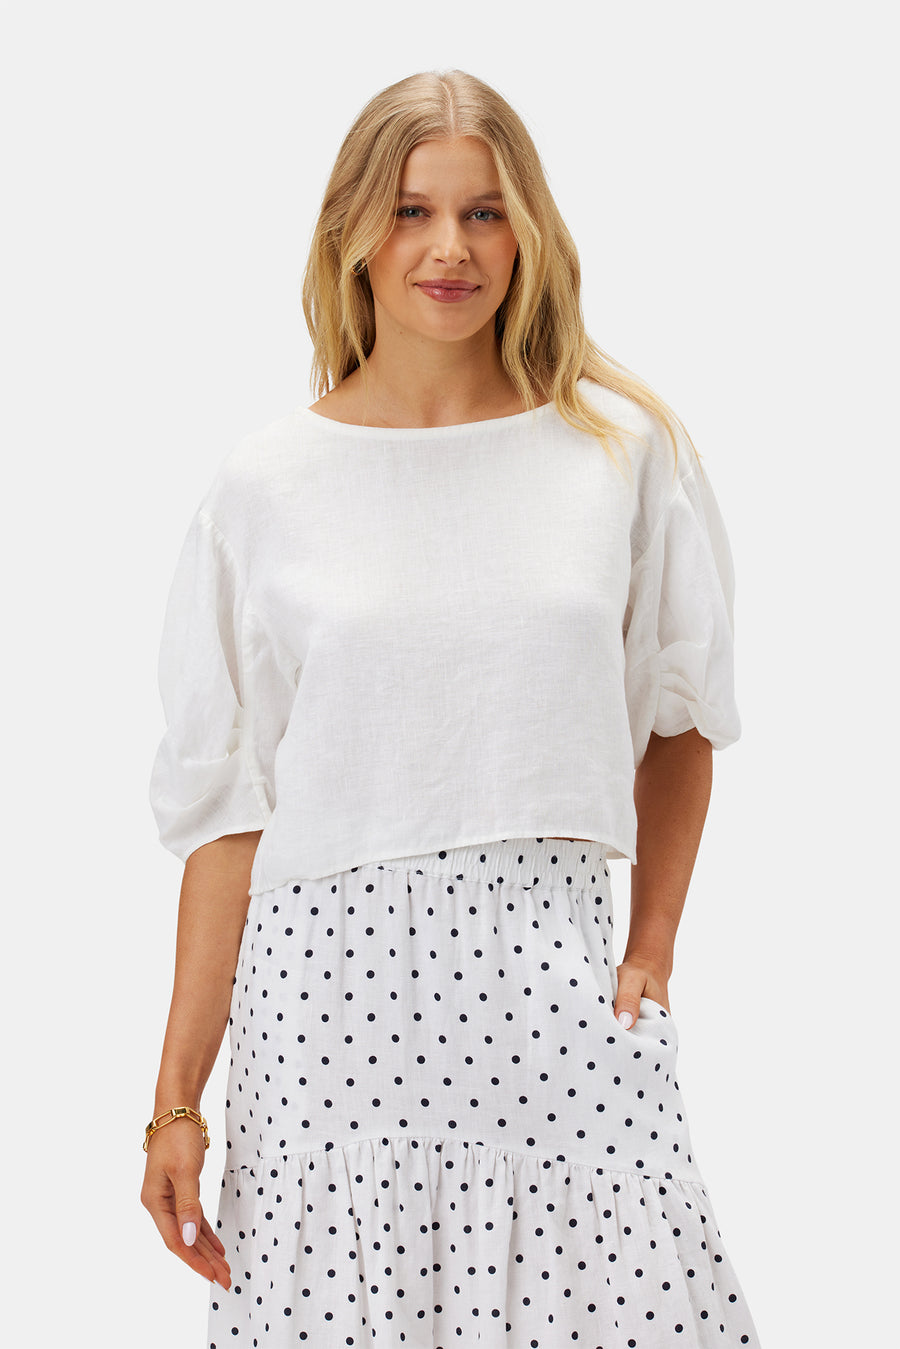 Lilly Pilly Leia Organic Linen Top - White